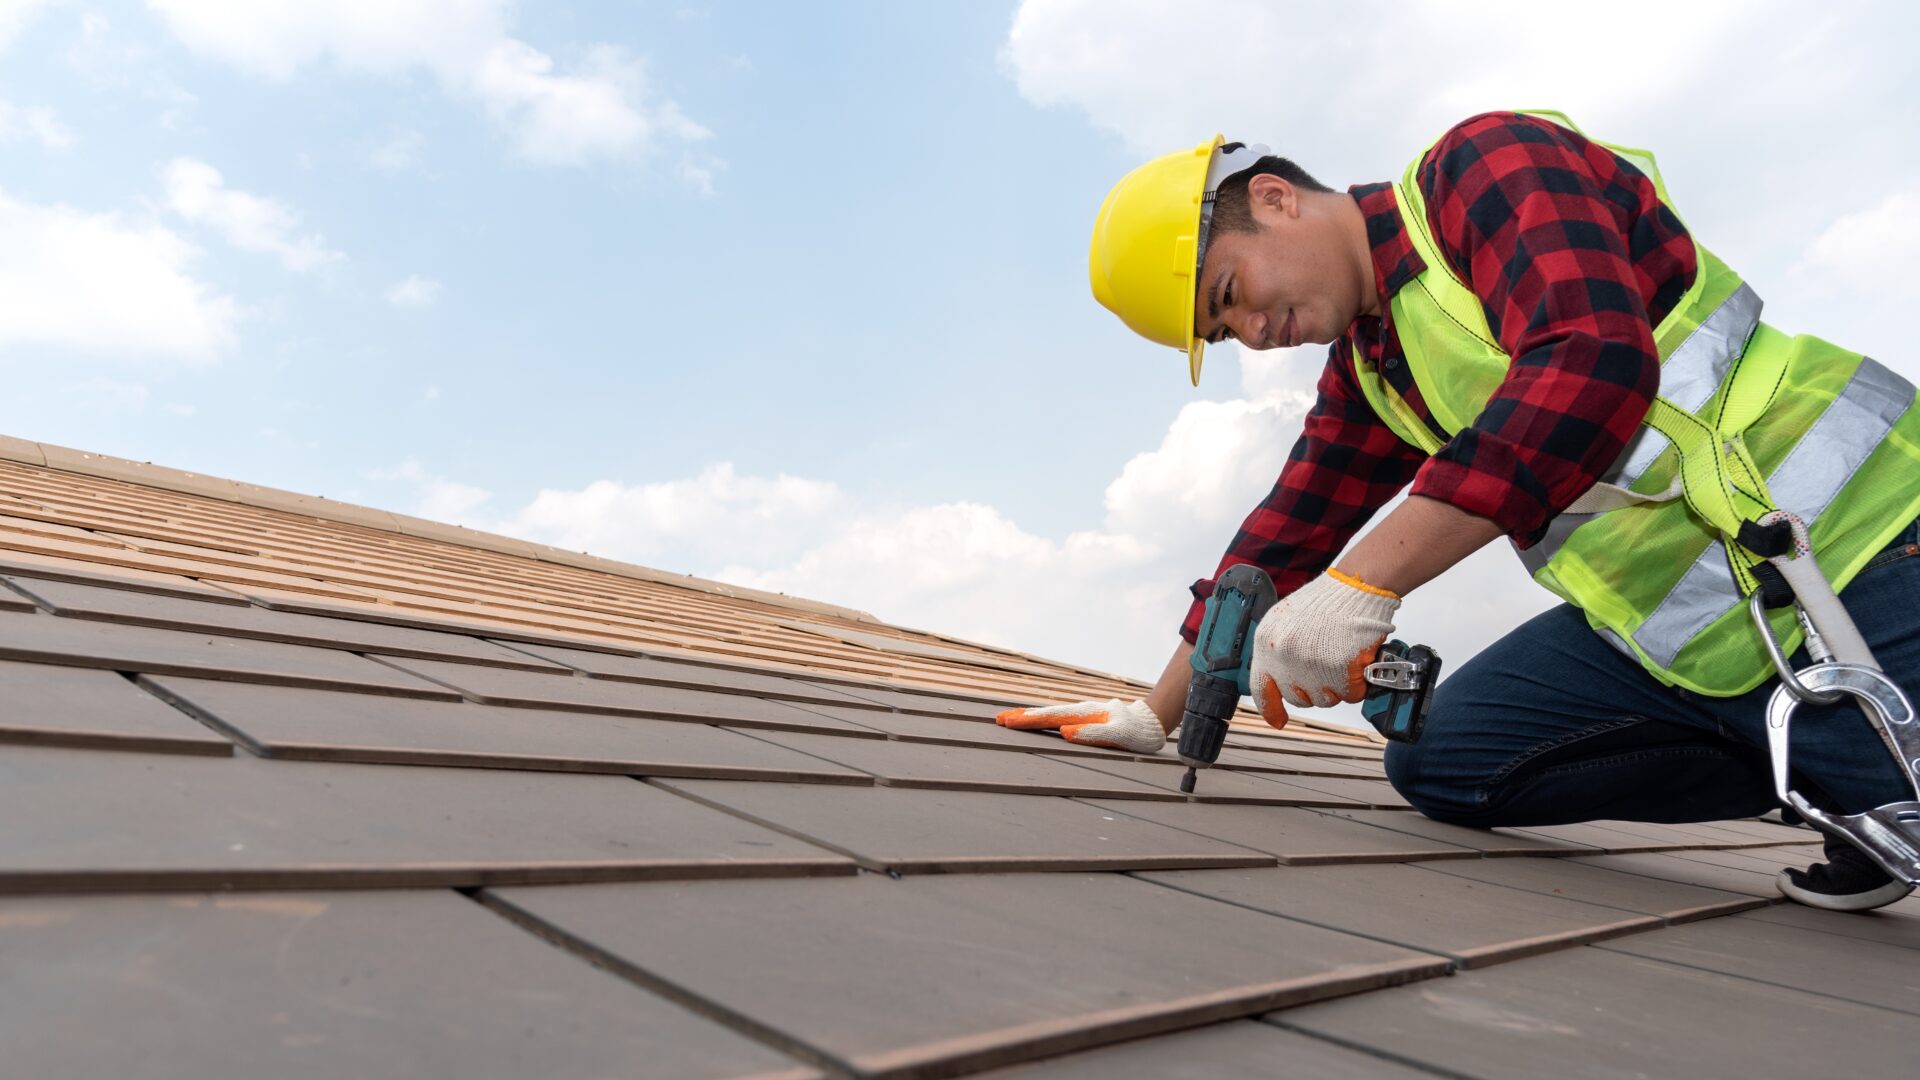 A roofer performs repairs on a tile roof